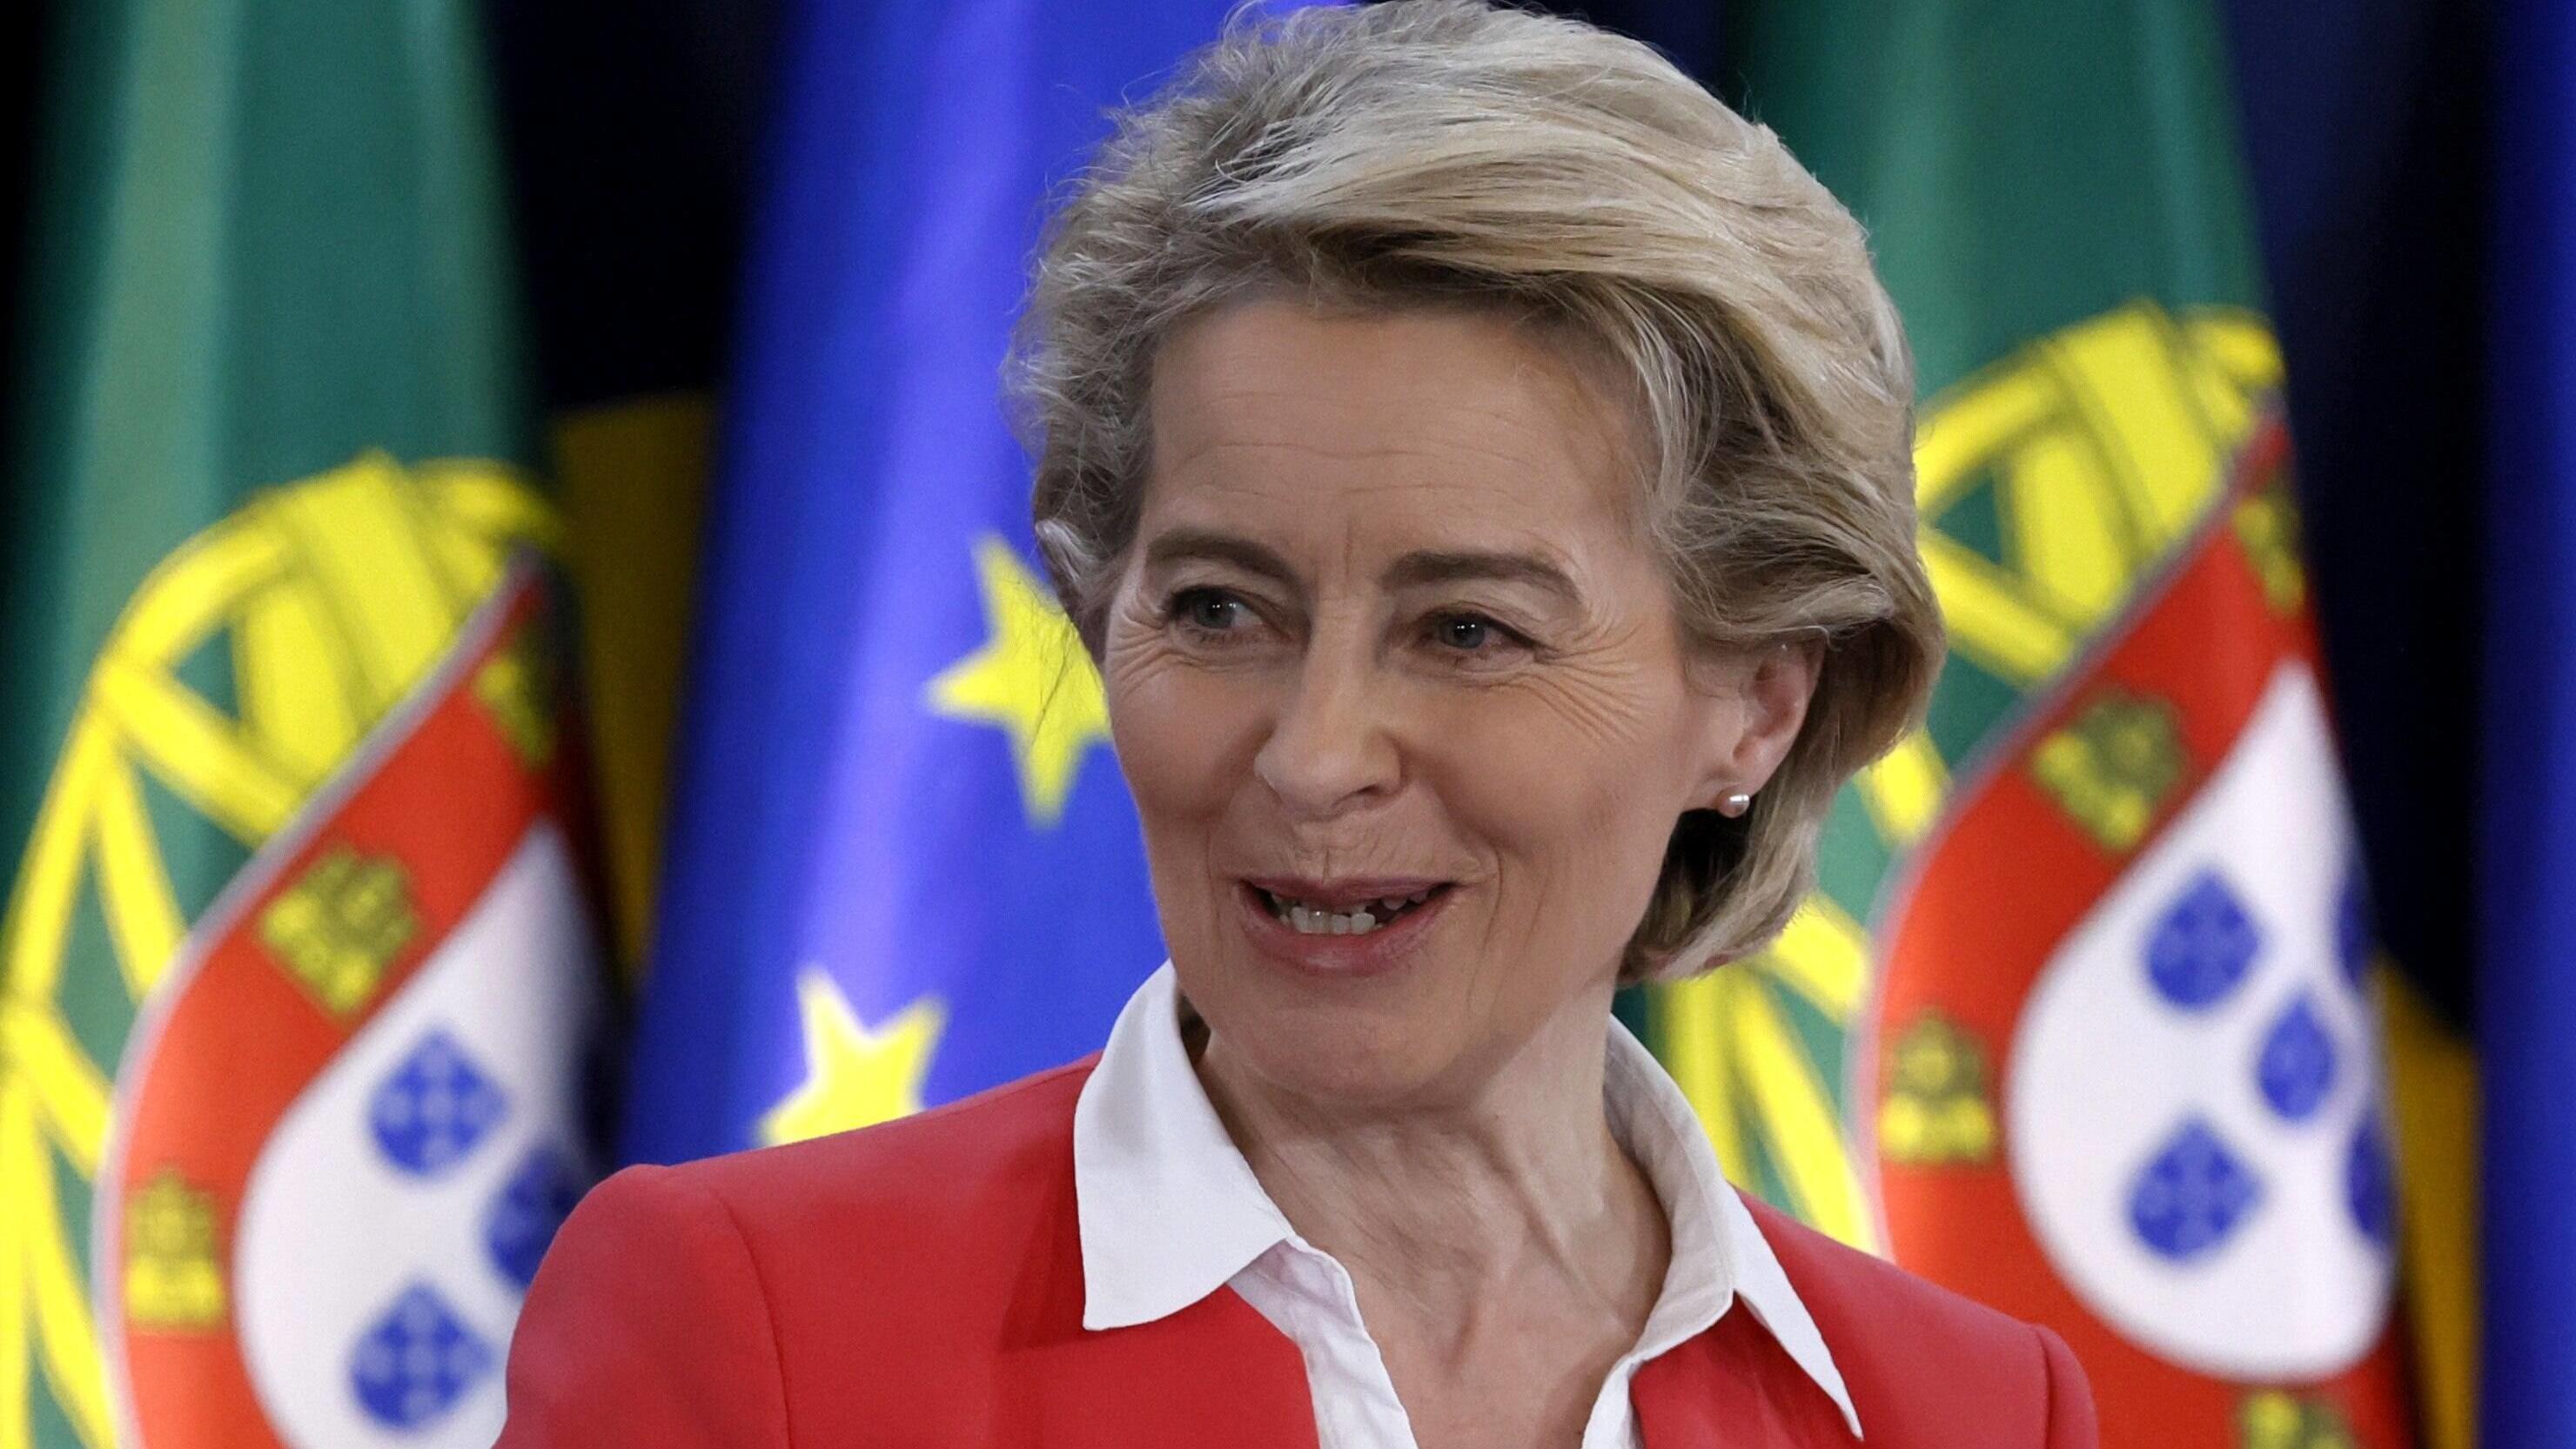  European Commission President Ursula von der Leyen gives a press conference after the European Council meeting during the 2nd day of the EU Social Summit at the Palacio de Cristal in Porto, Portugal, 08 May 2021. European Council meeting ACHTUNG: NU